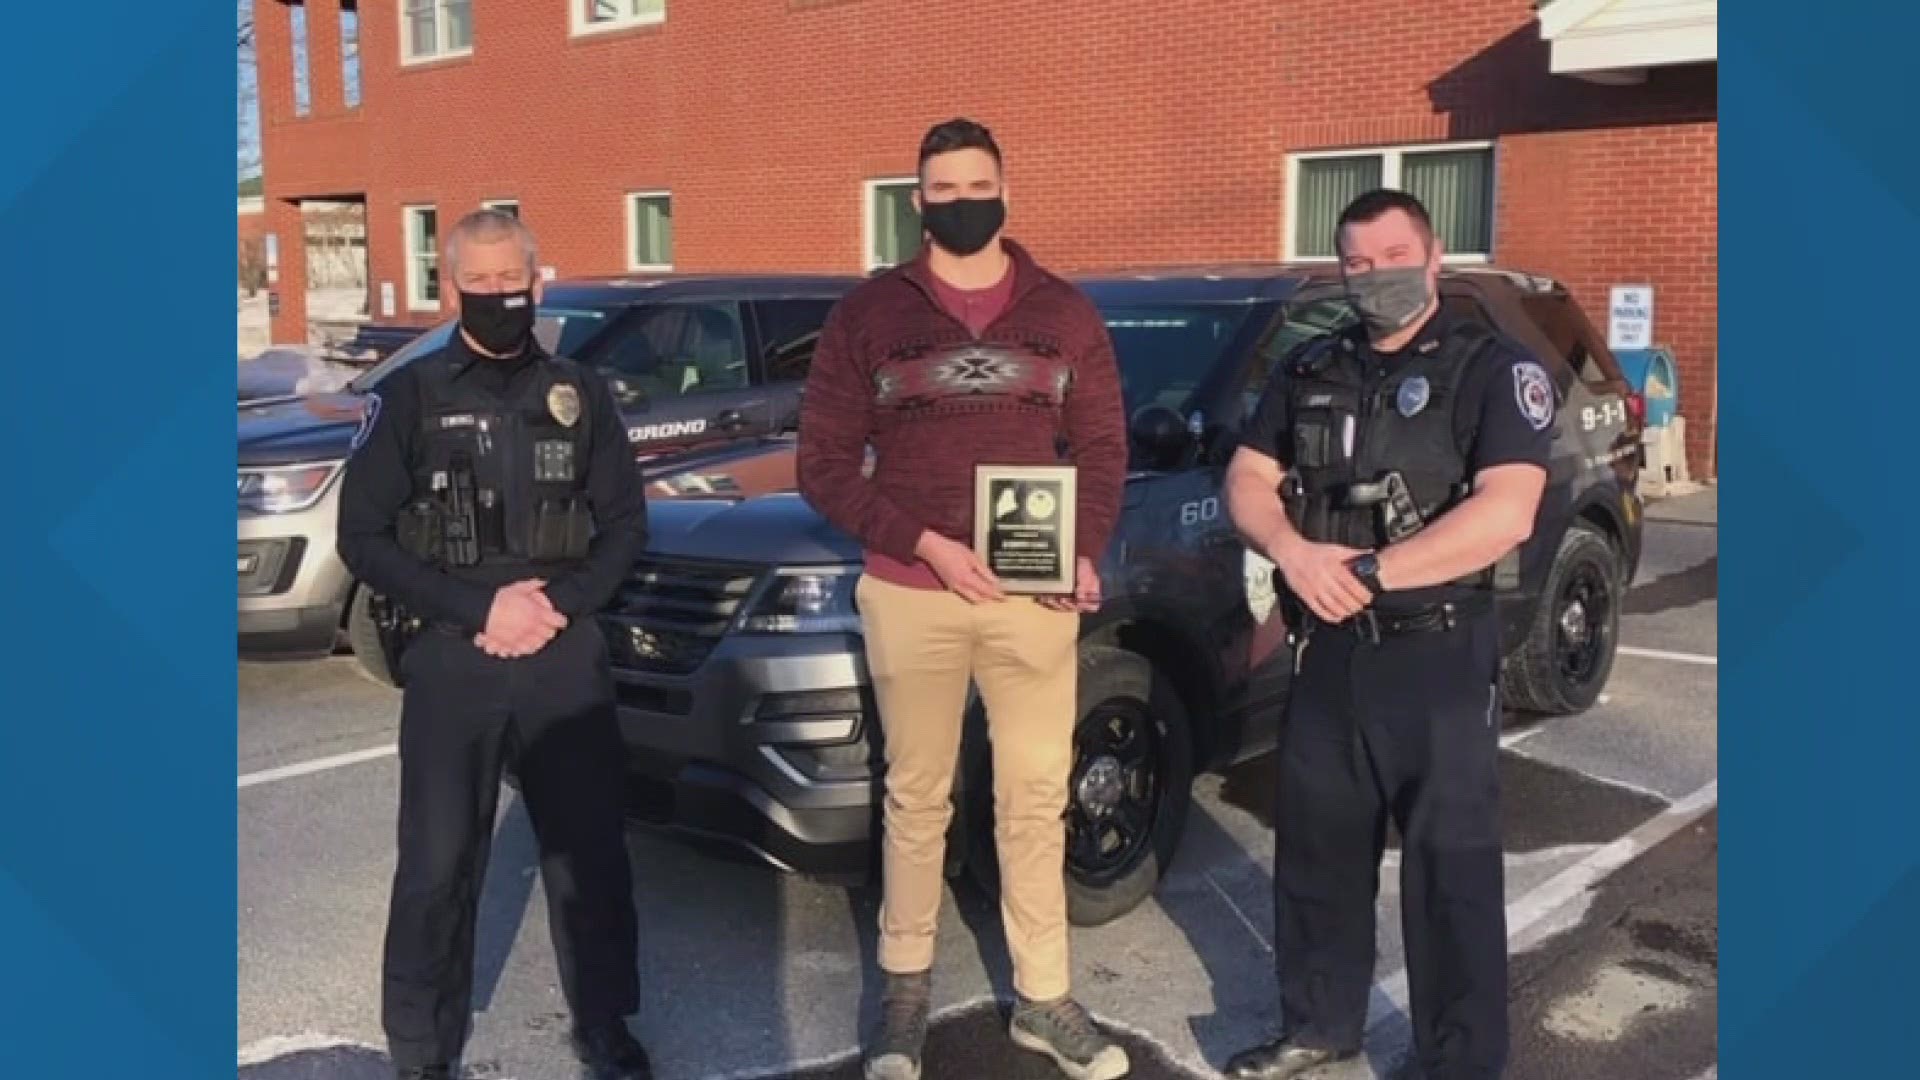 A UMaine student from New York wins the Orono Police Department's Courageous Citizen Award for saving a man's life who was driving slow and erratically.